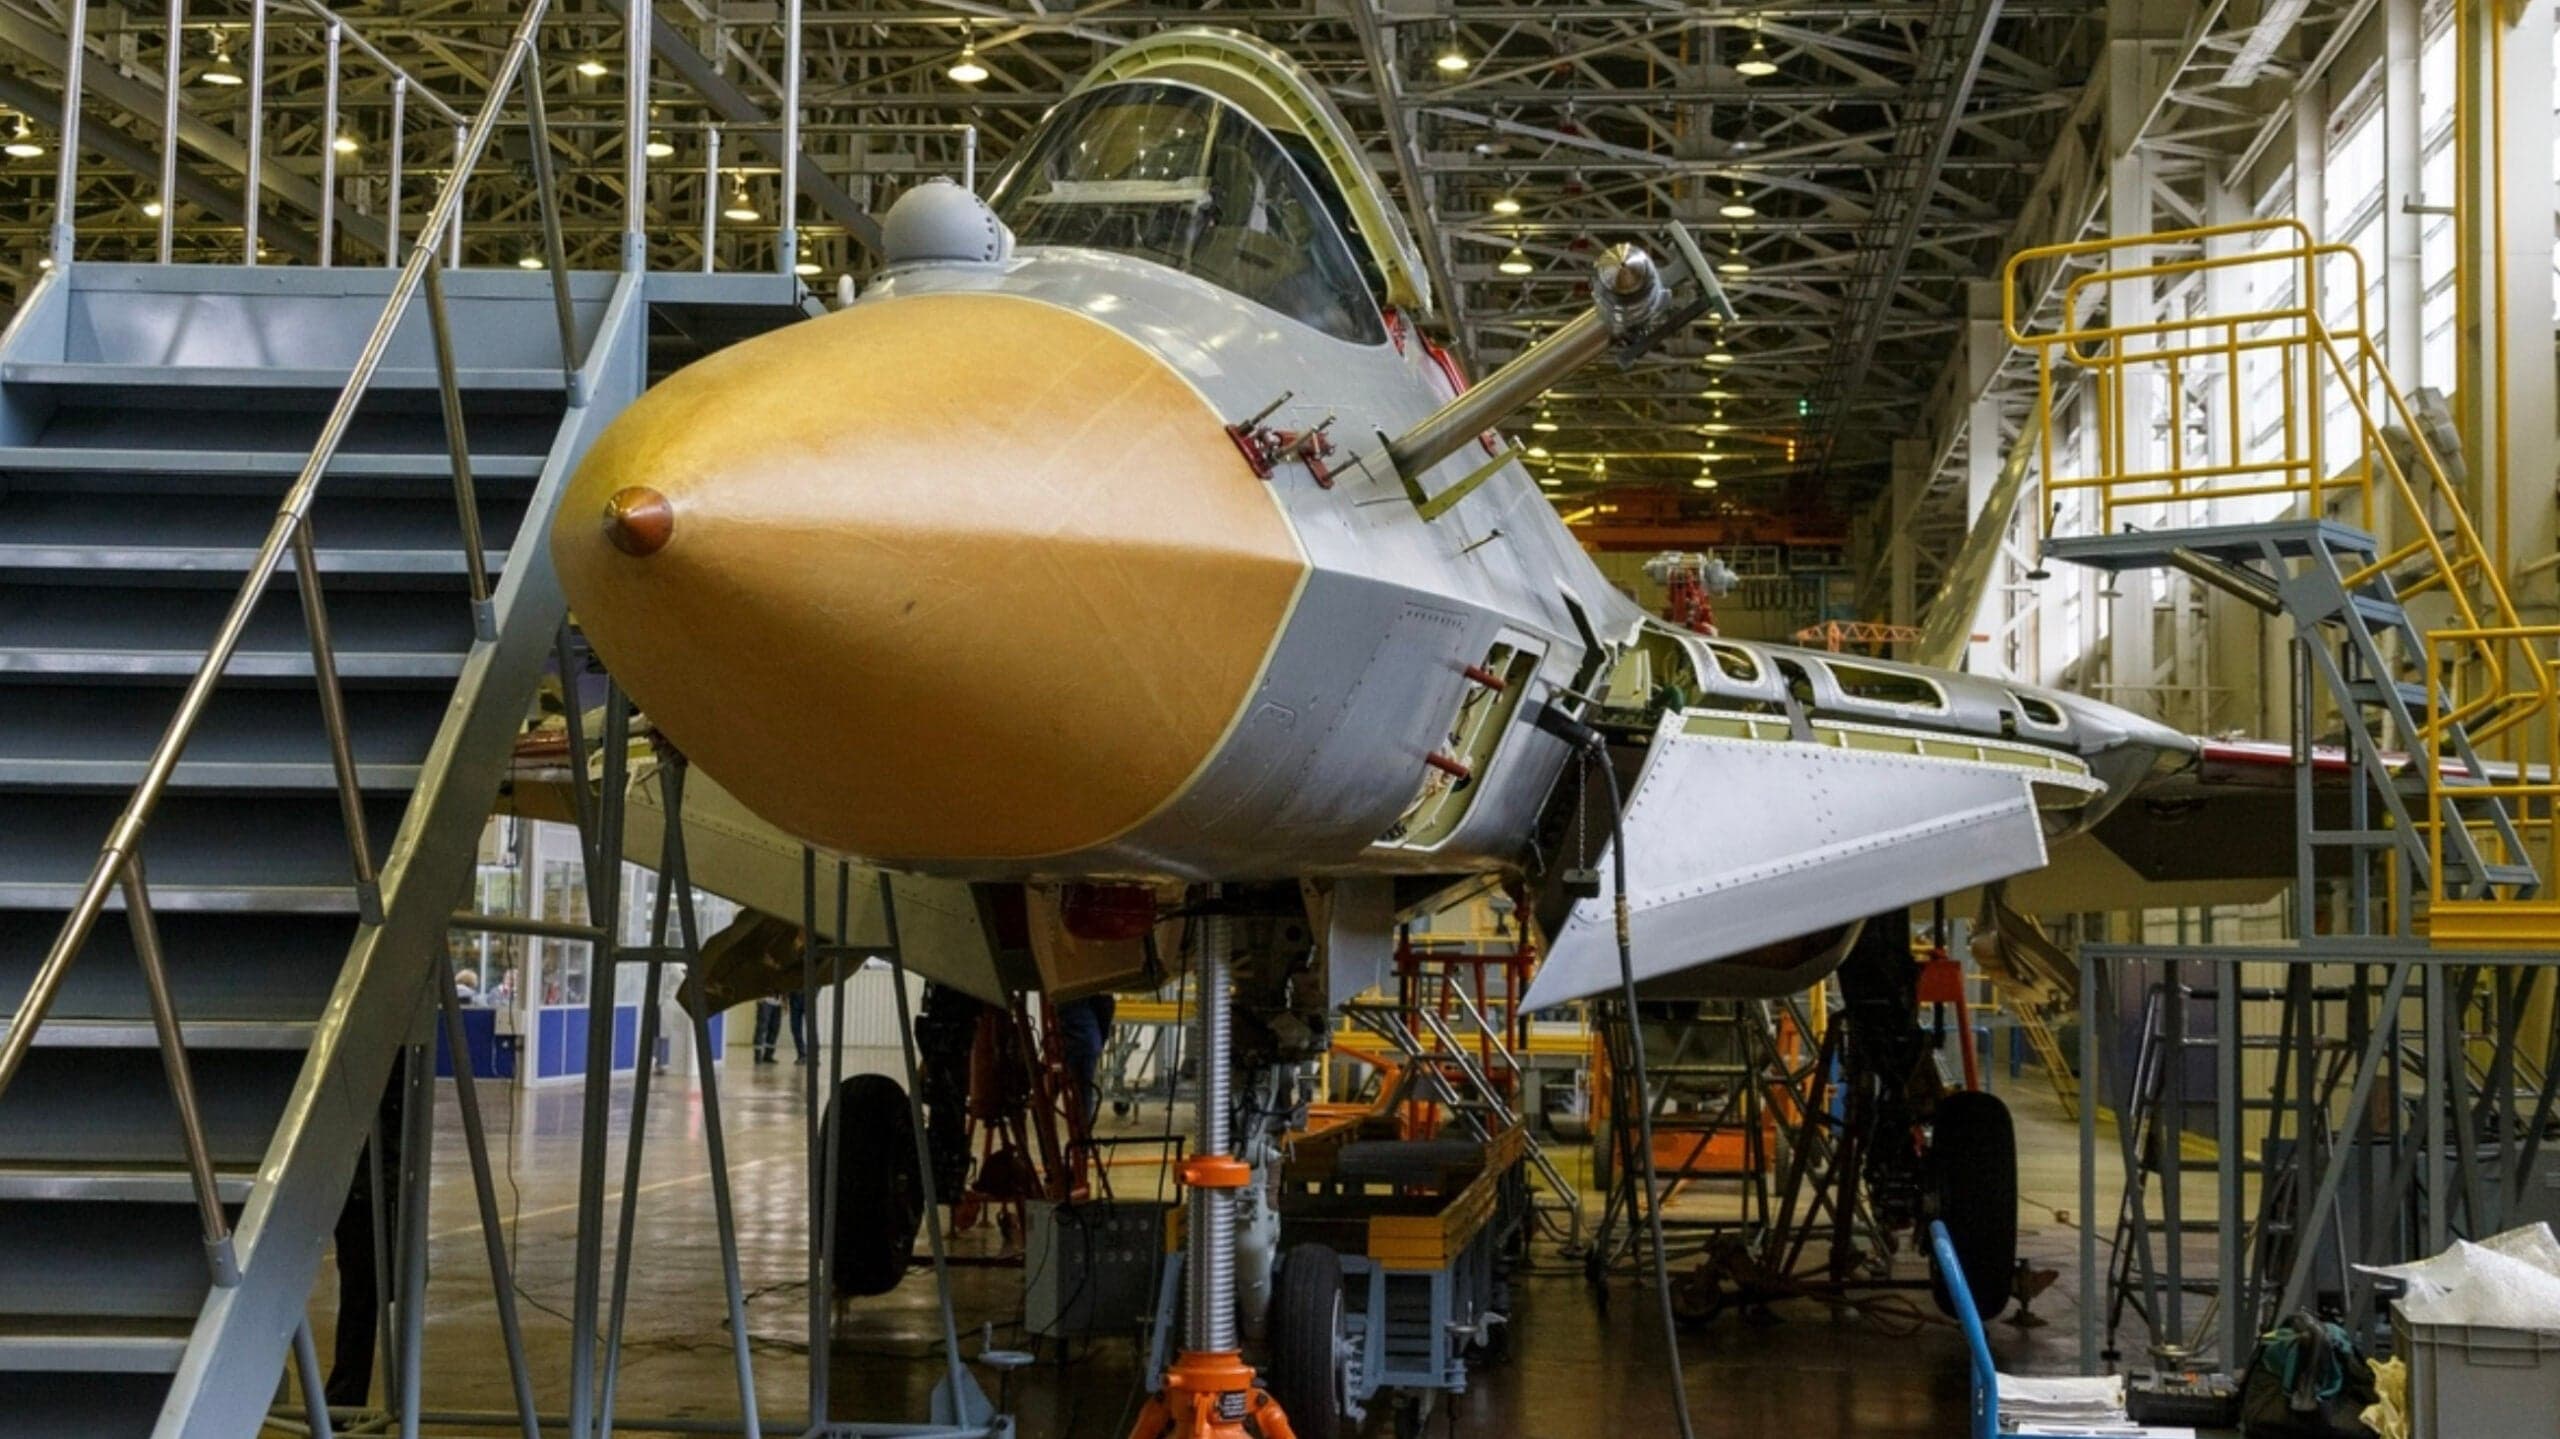 Check Out These Images Of Russia’s Second Su-57 Felon Fighter Under Construction